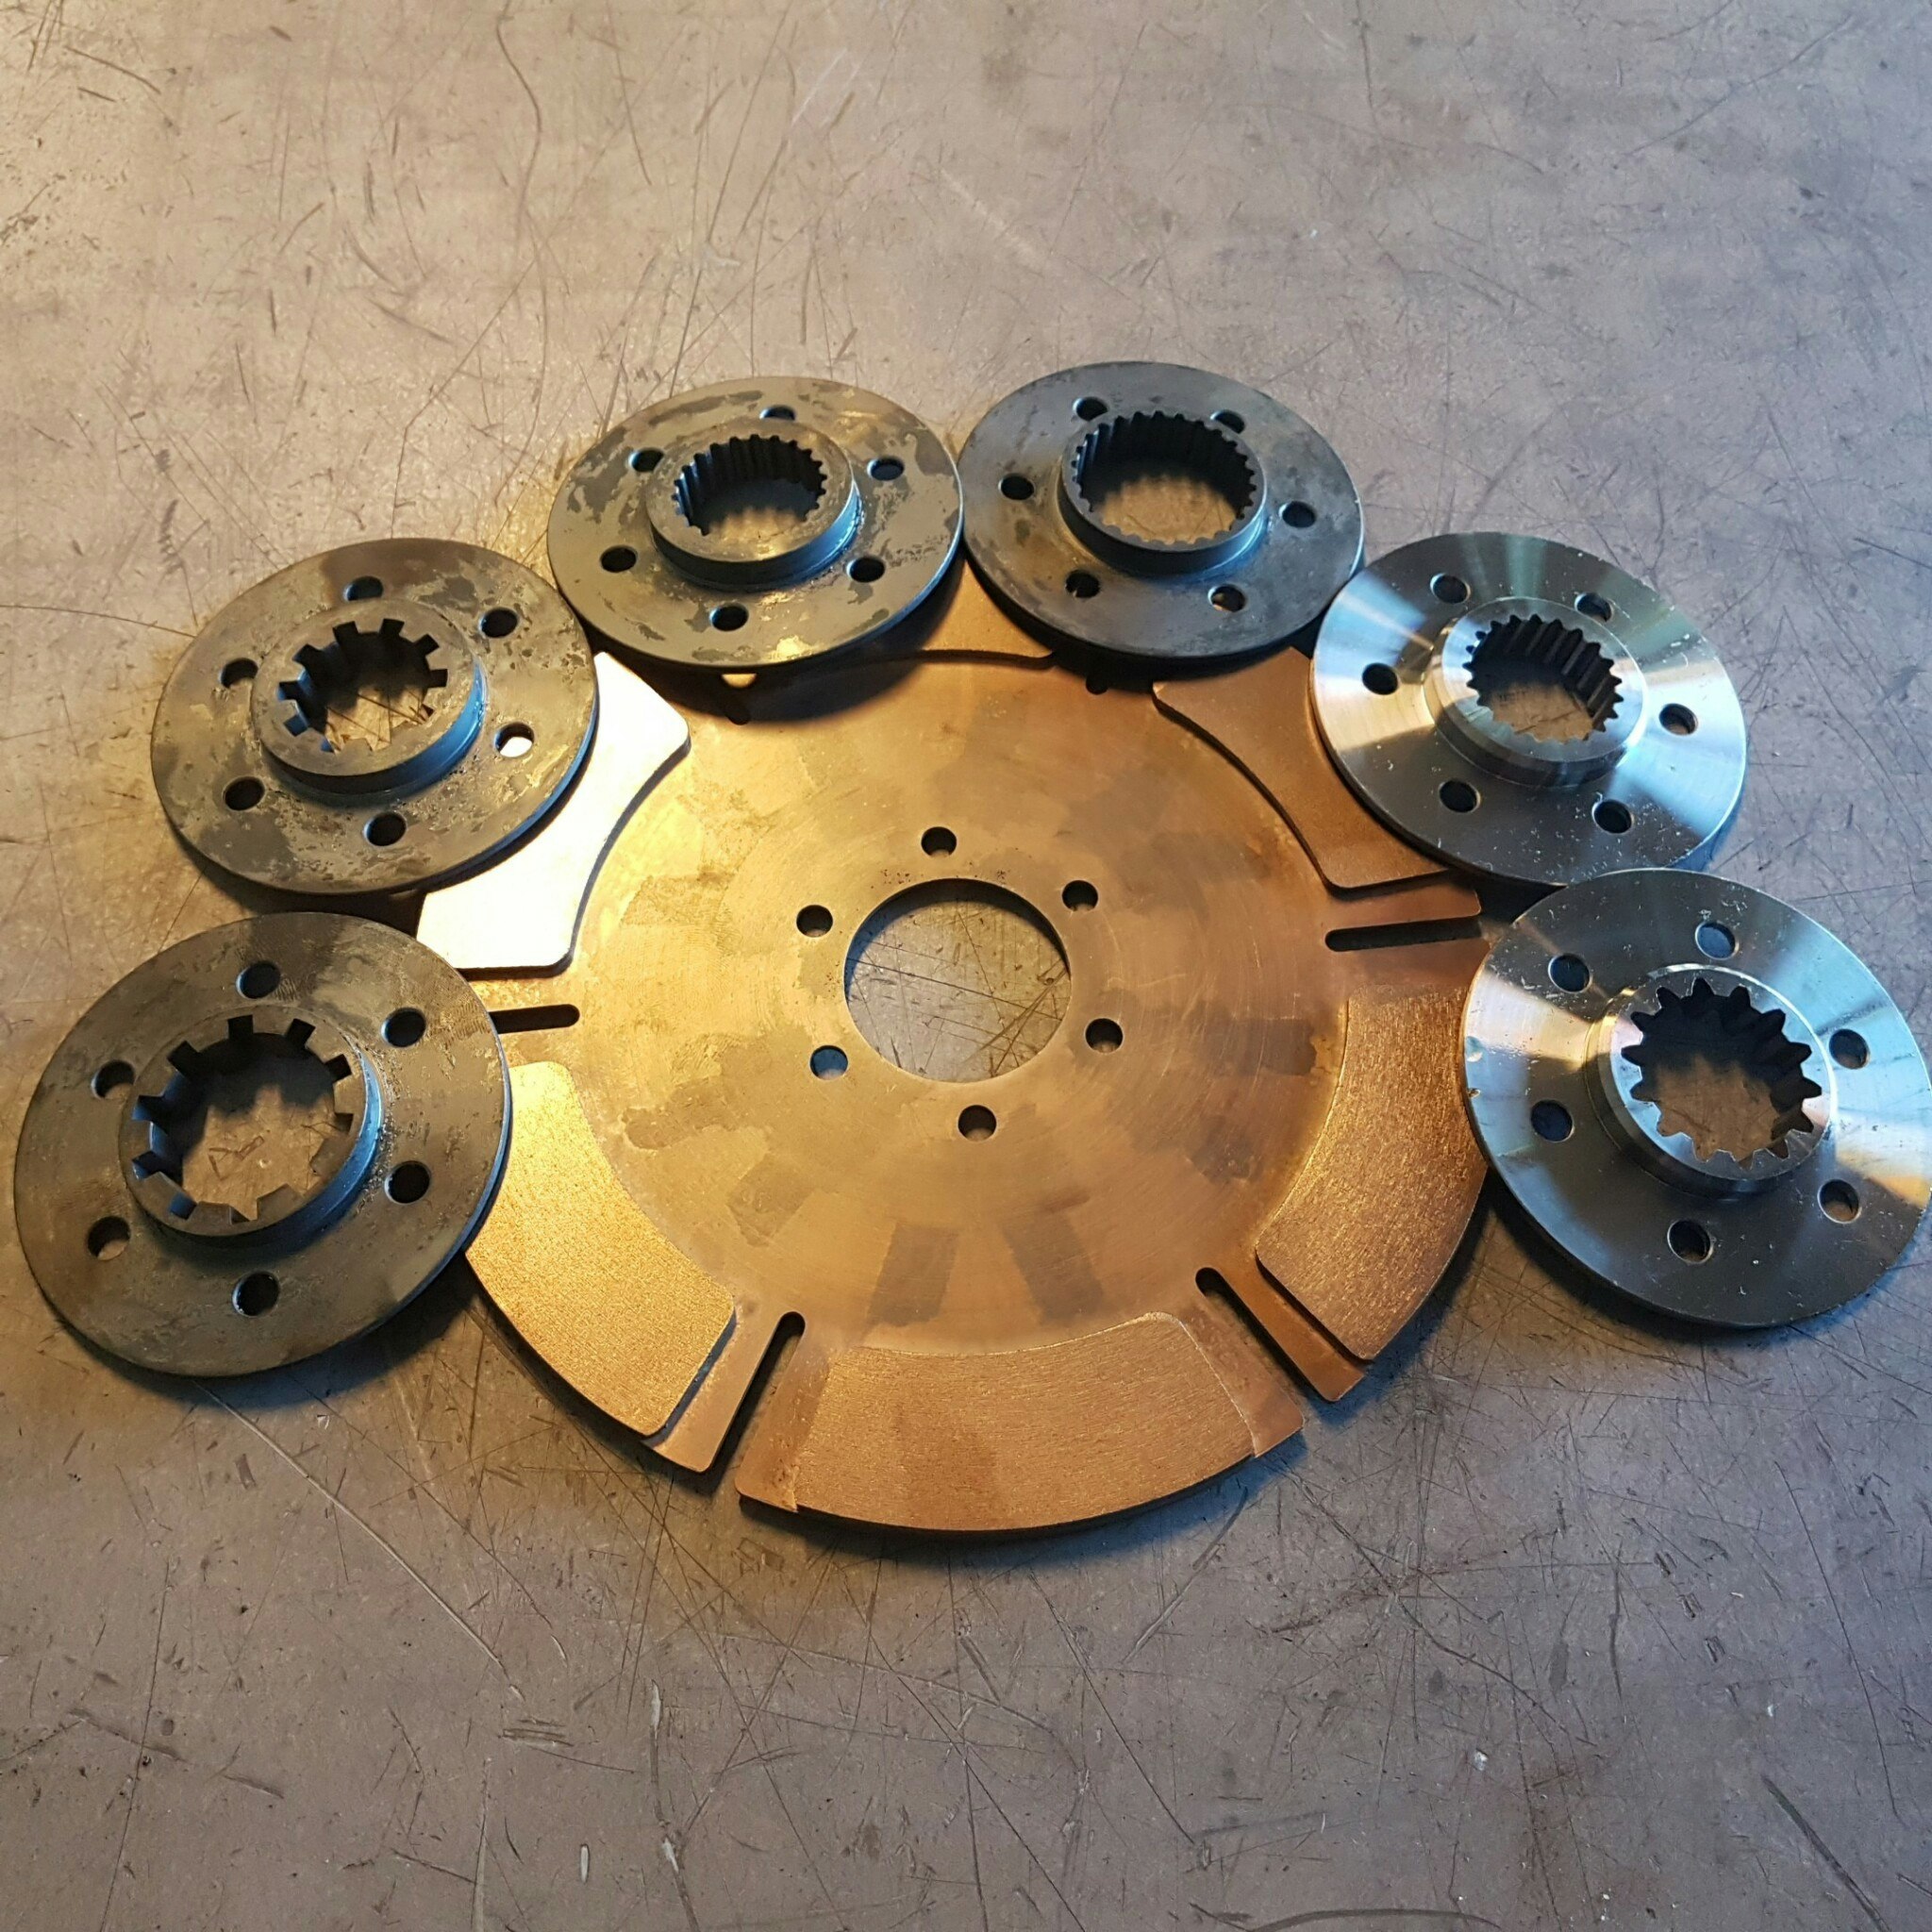 Tenaci copper 7;2 mm disc - 184 mm 6 puck with hub included